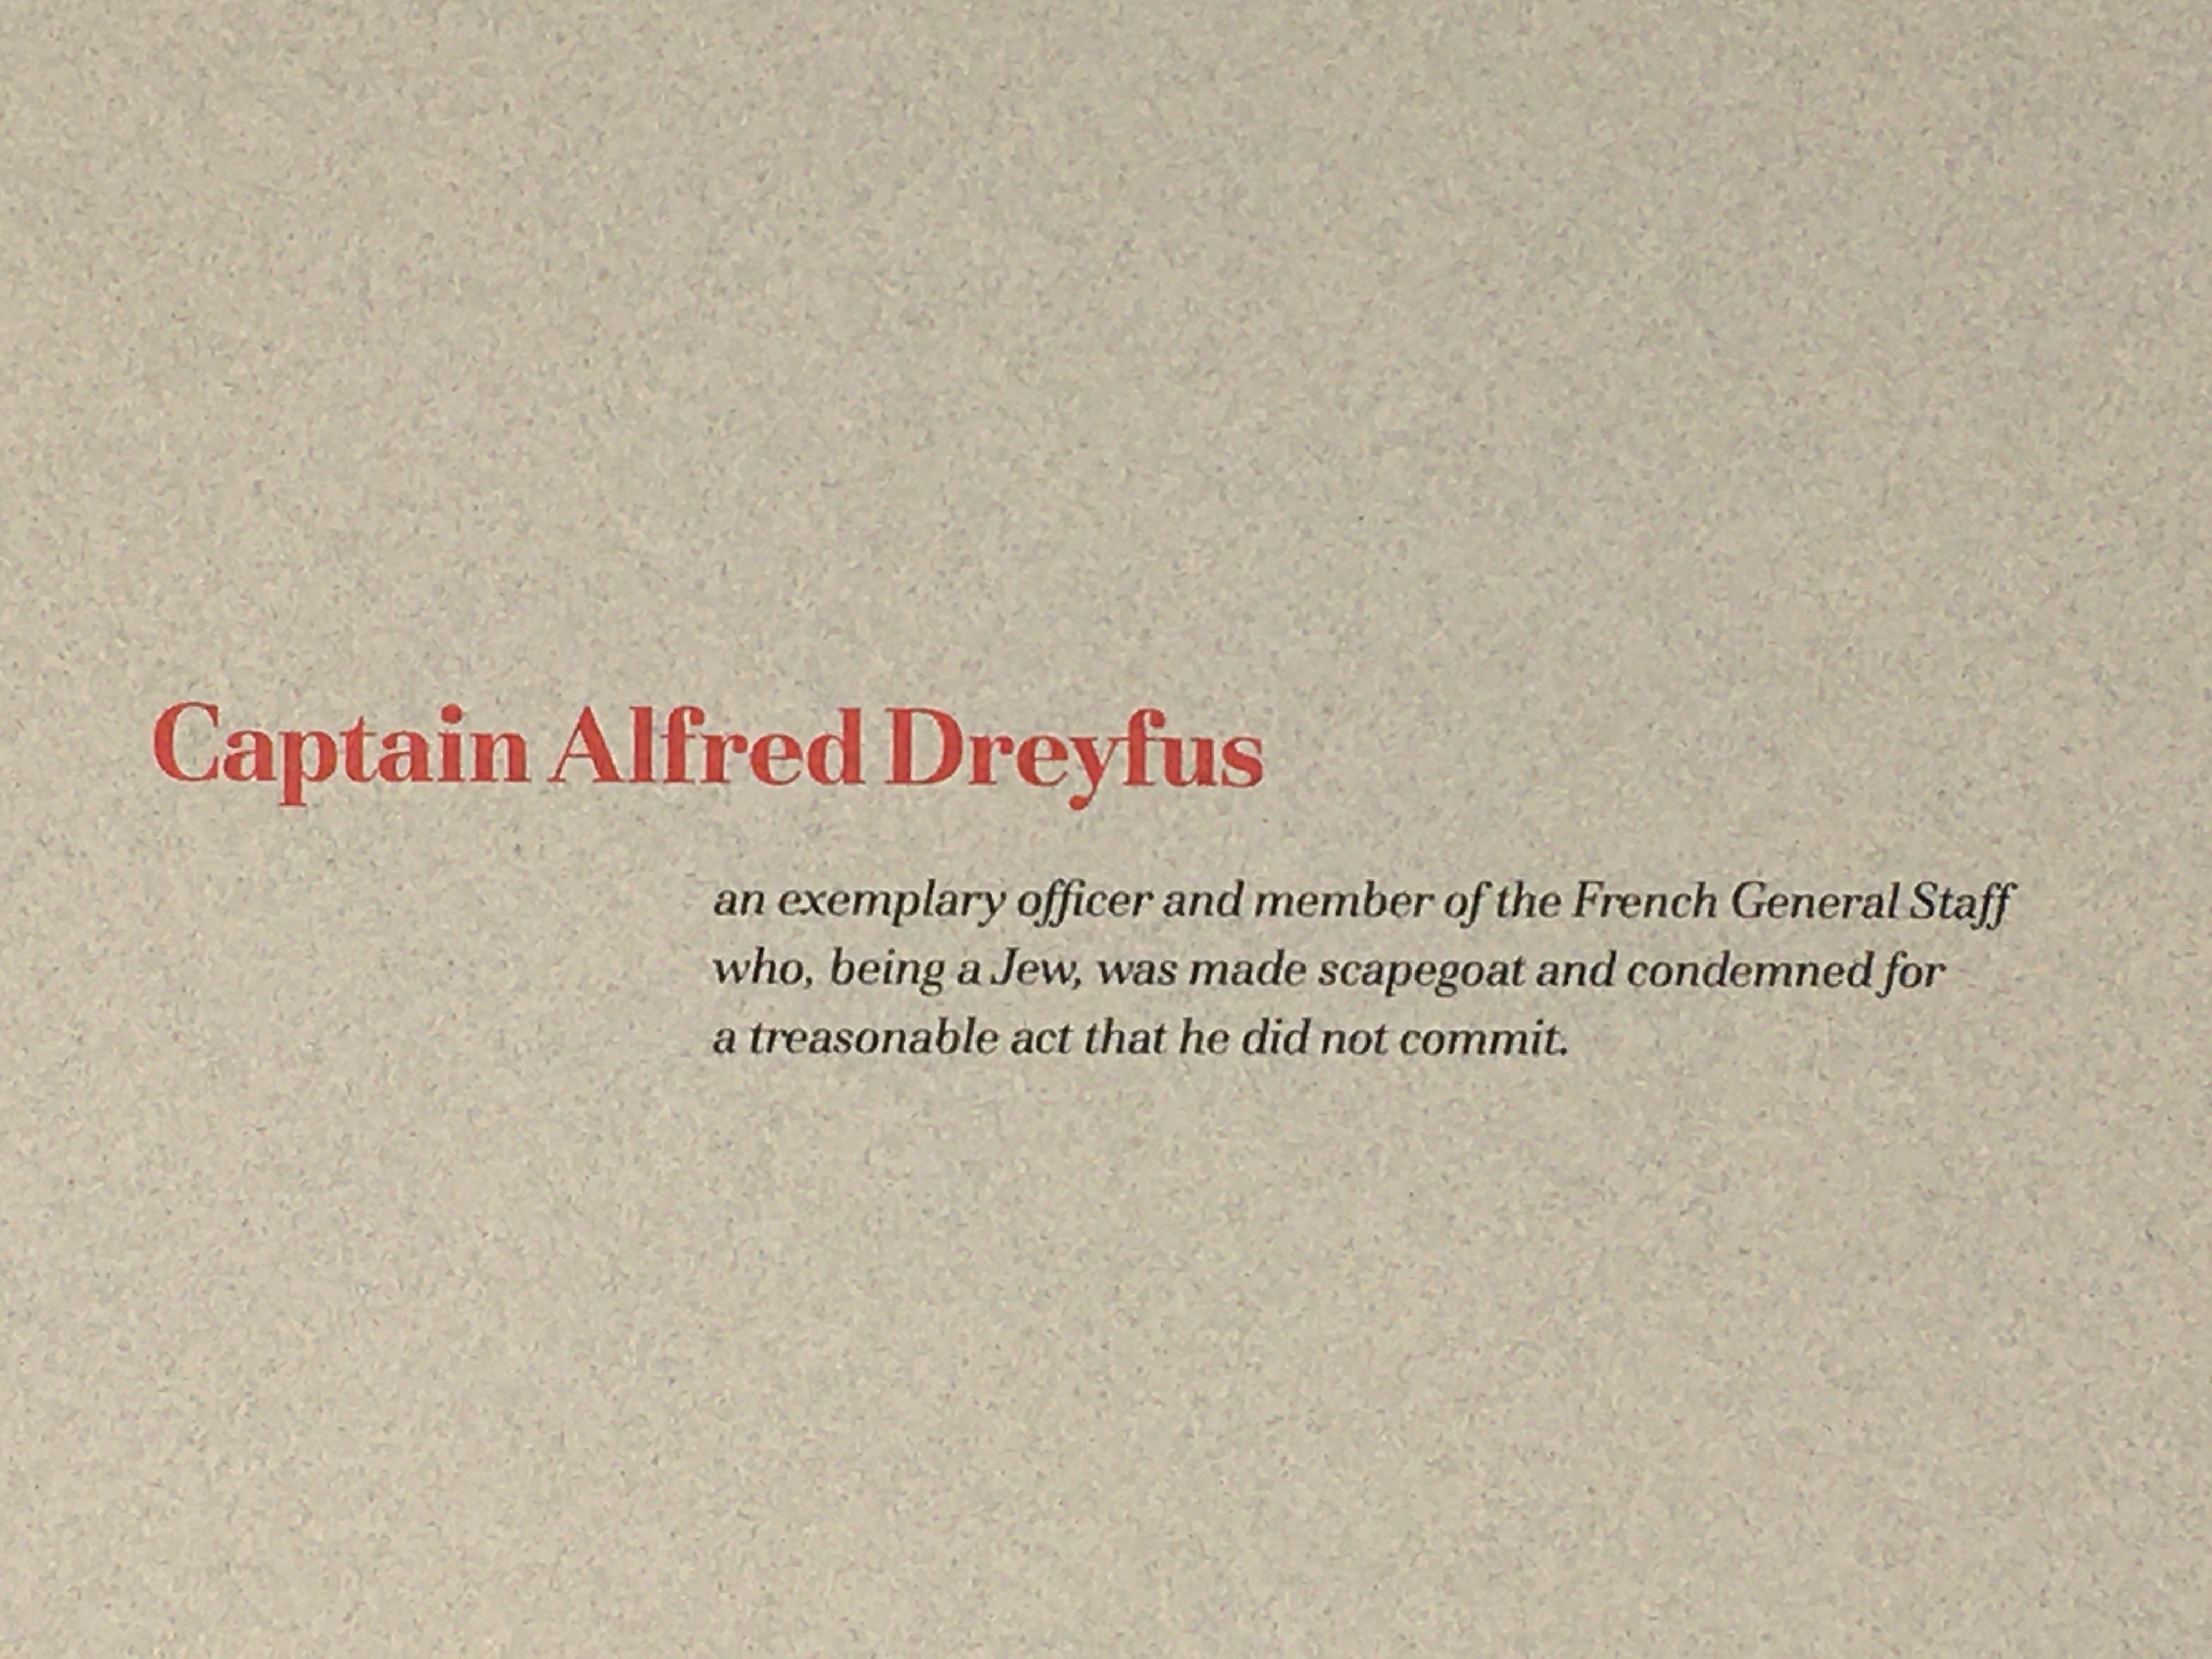 Dreyfus Affair - Book Collection featuring The Ben Shahn Prints (Limited First Edition) - Image 26 of 73